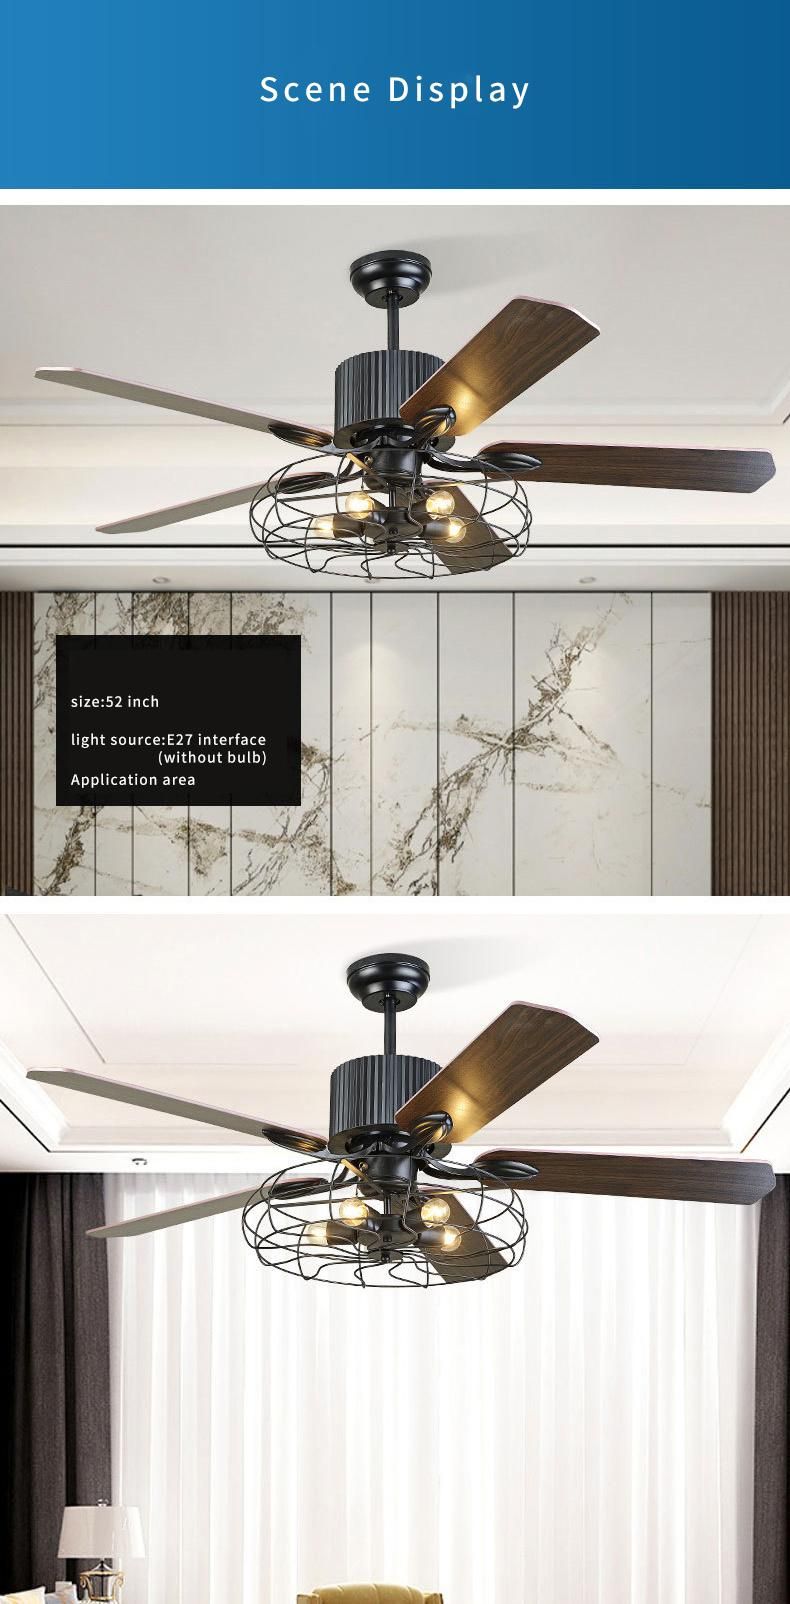 Hot Sale USA Morden Industrial Style Wooden 5 Blades LED Ceiling Fan with Light Bulb for Ceiling with Remote Control